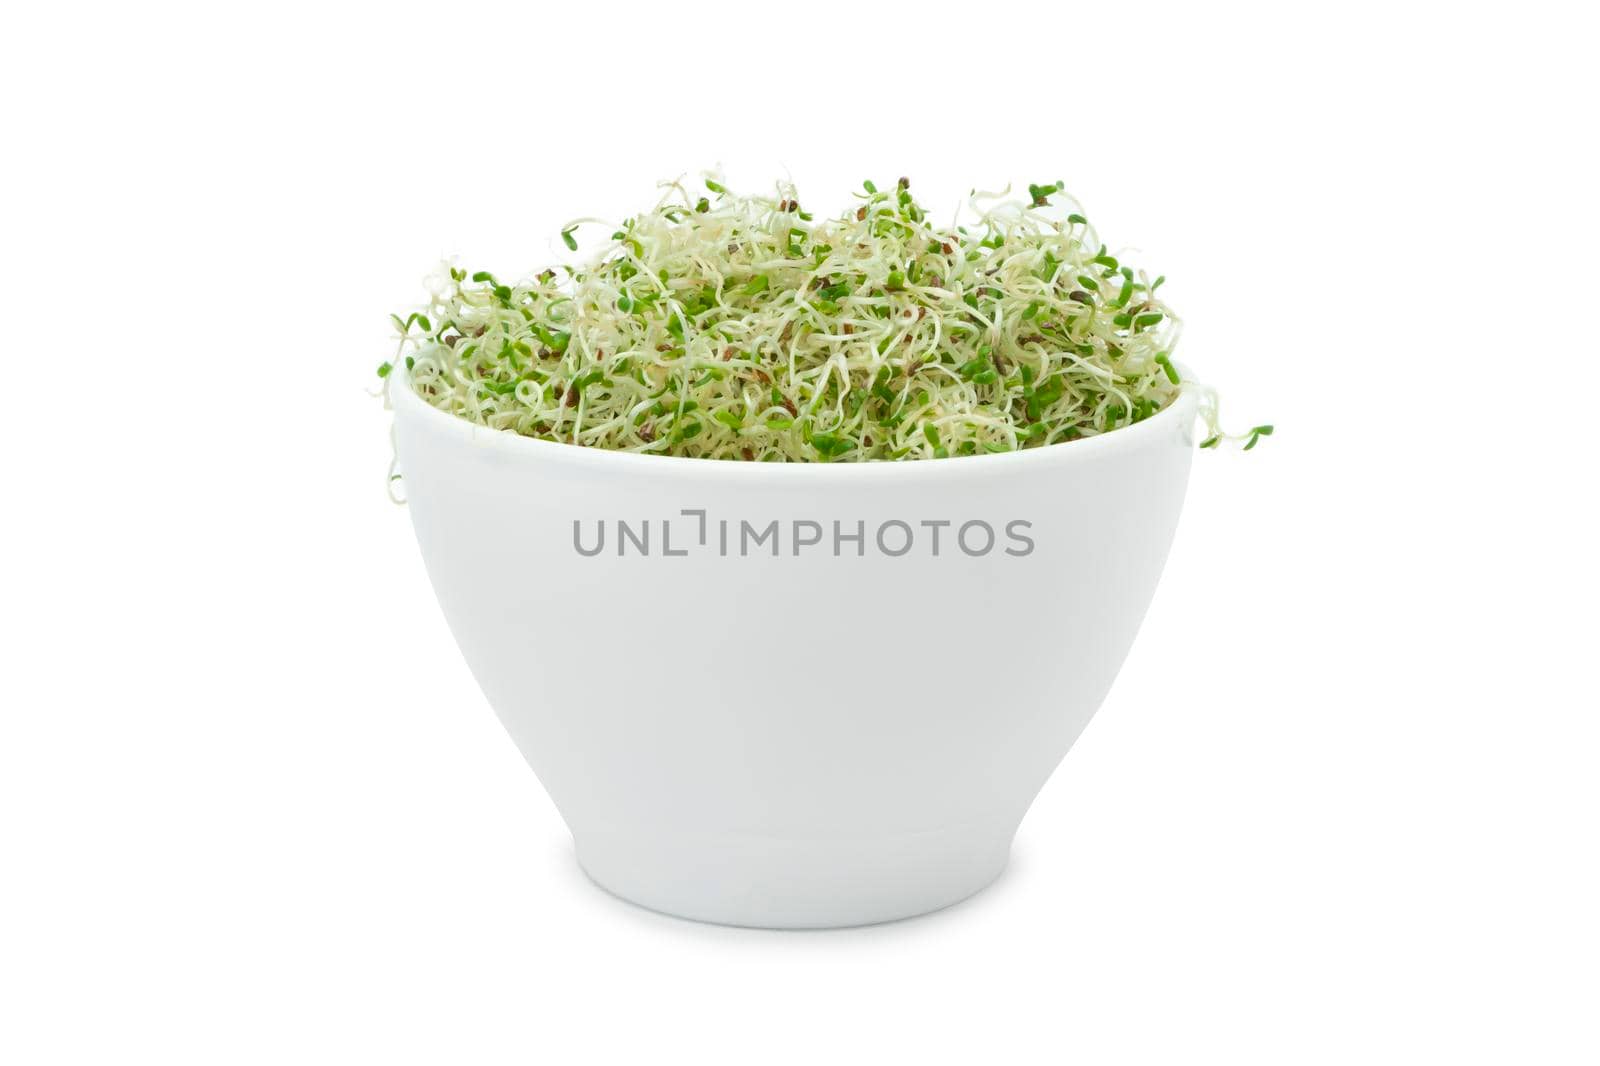 Organic young alfalfa sprouts in a cup on a white background by SlayCer